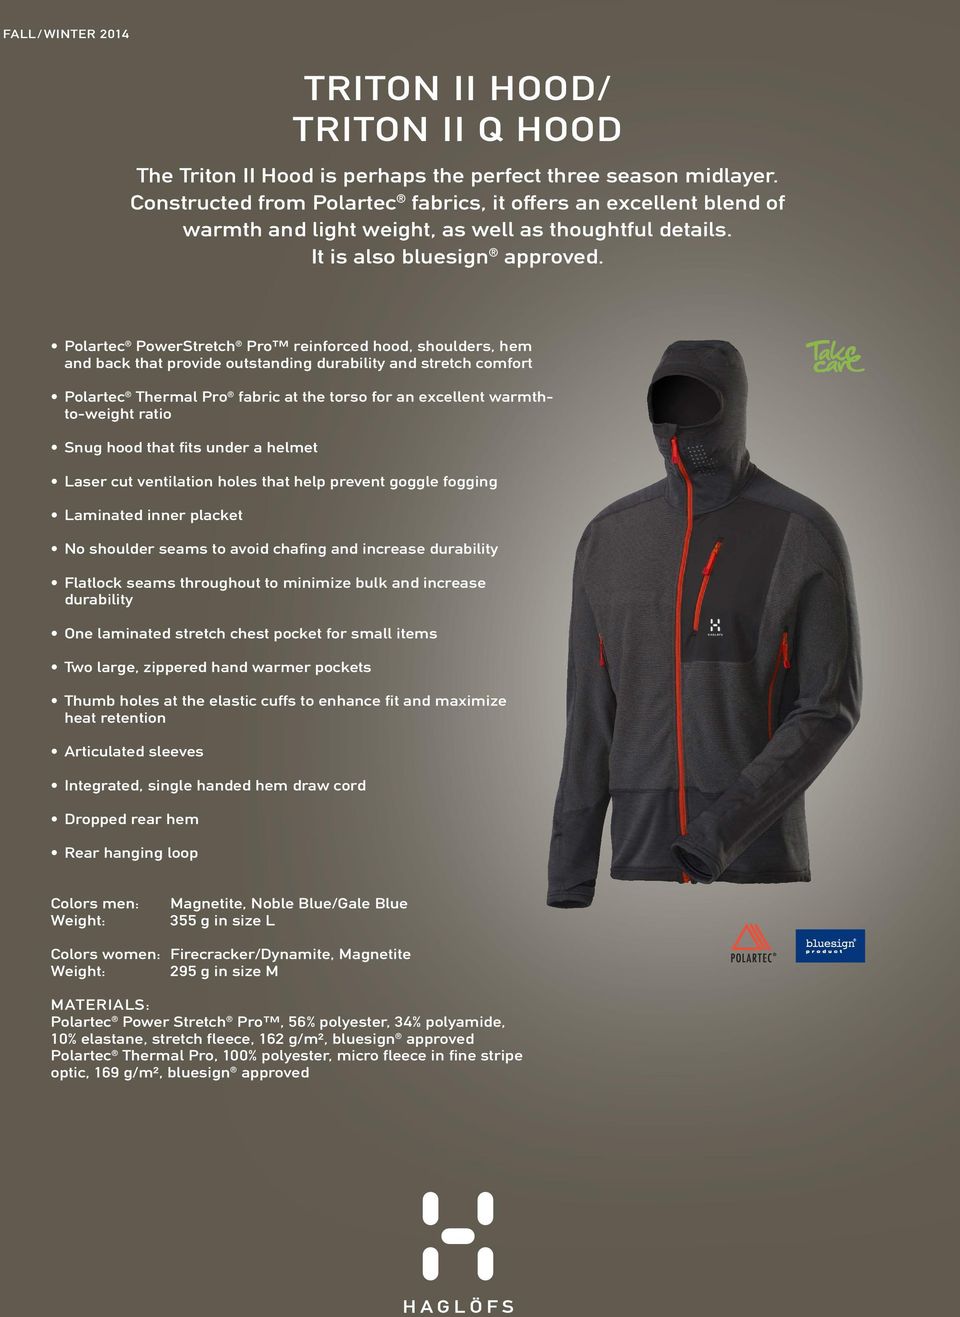 Polartec PowerStretch Pro reinforced hood, shoulders, hem and back that provide outstanding durability and stretch comfort Polartec Thermal Pro fabric at the torso for an excellent warmthto-weight